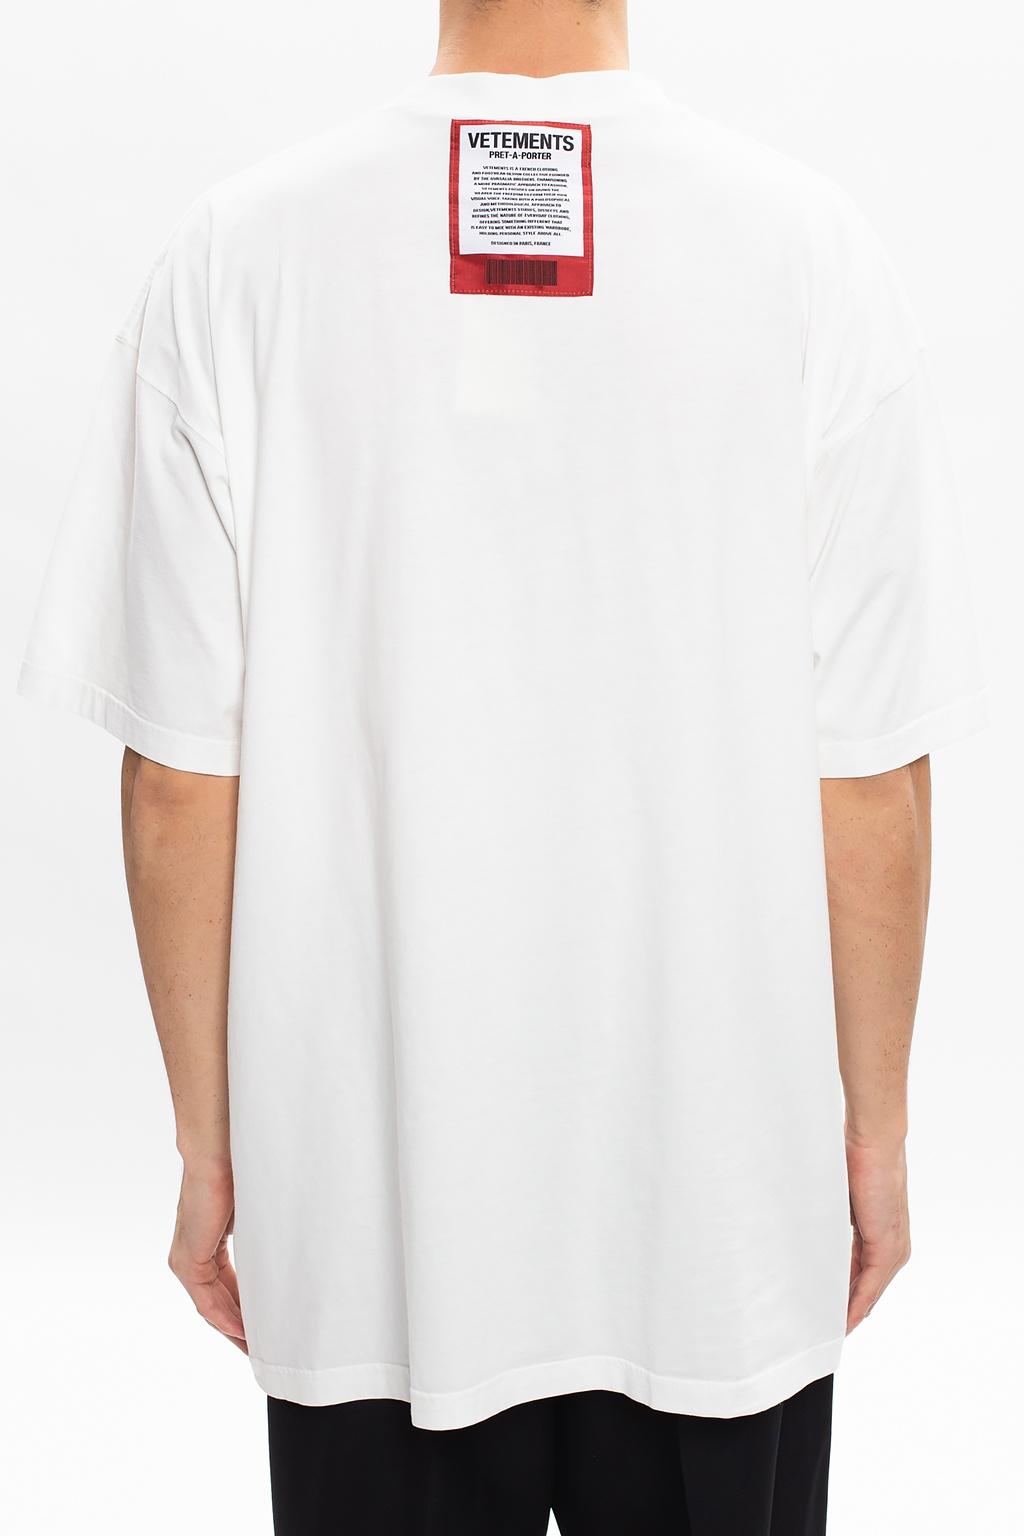 Vetements T-shirt With Logo in White for Men | Lyst